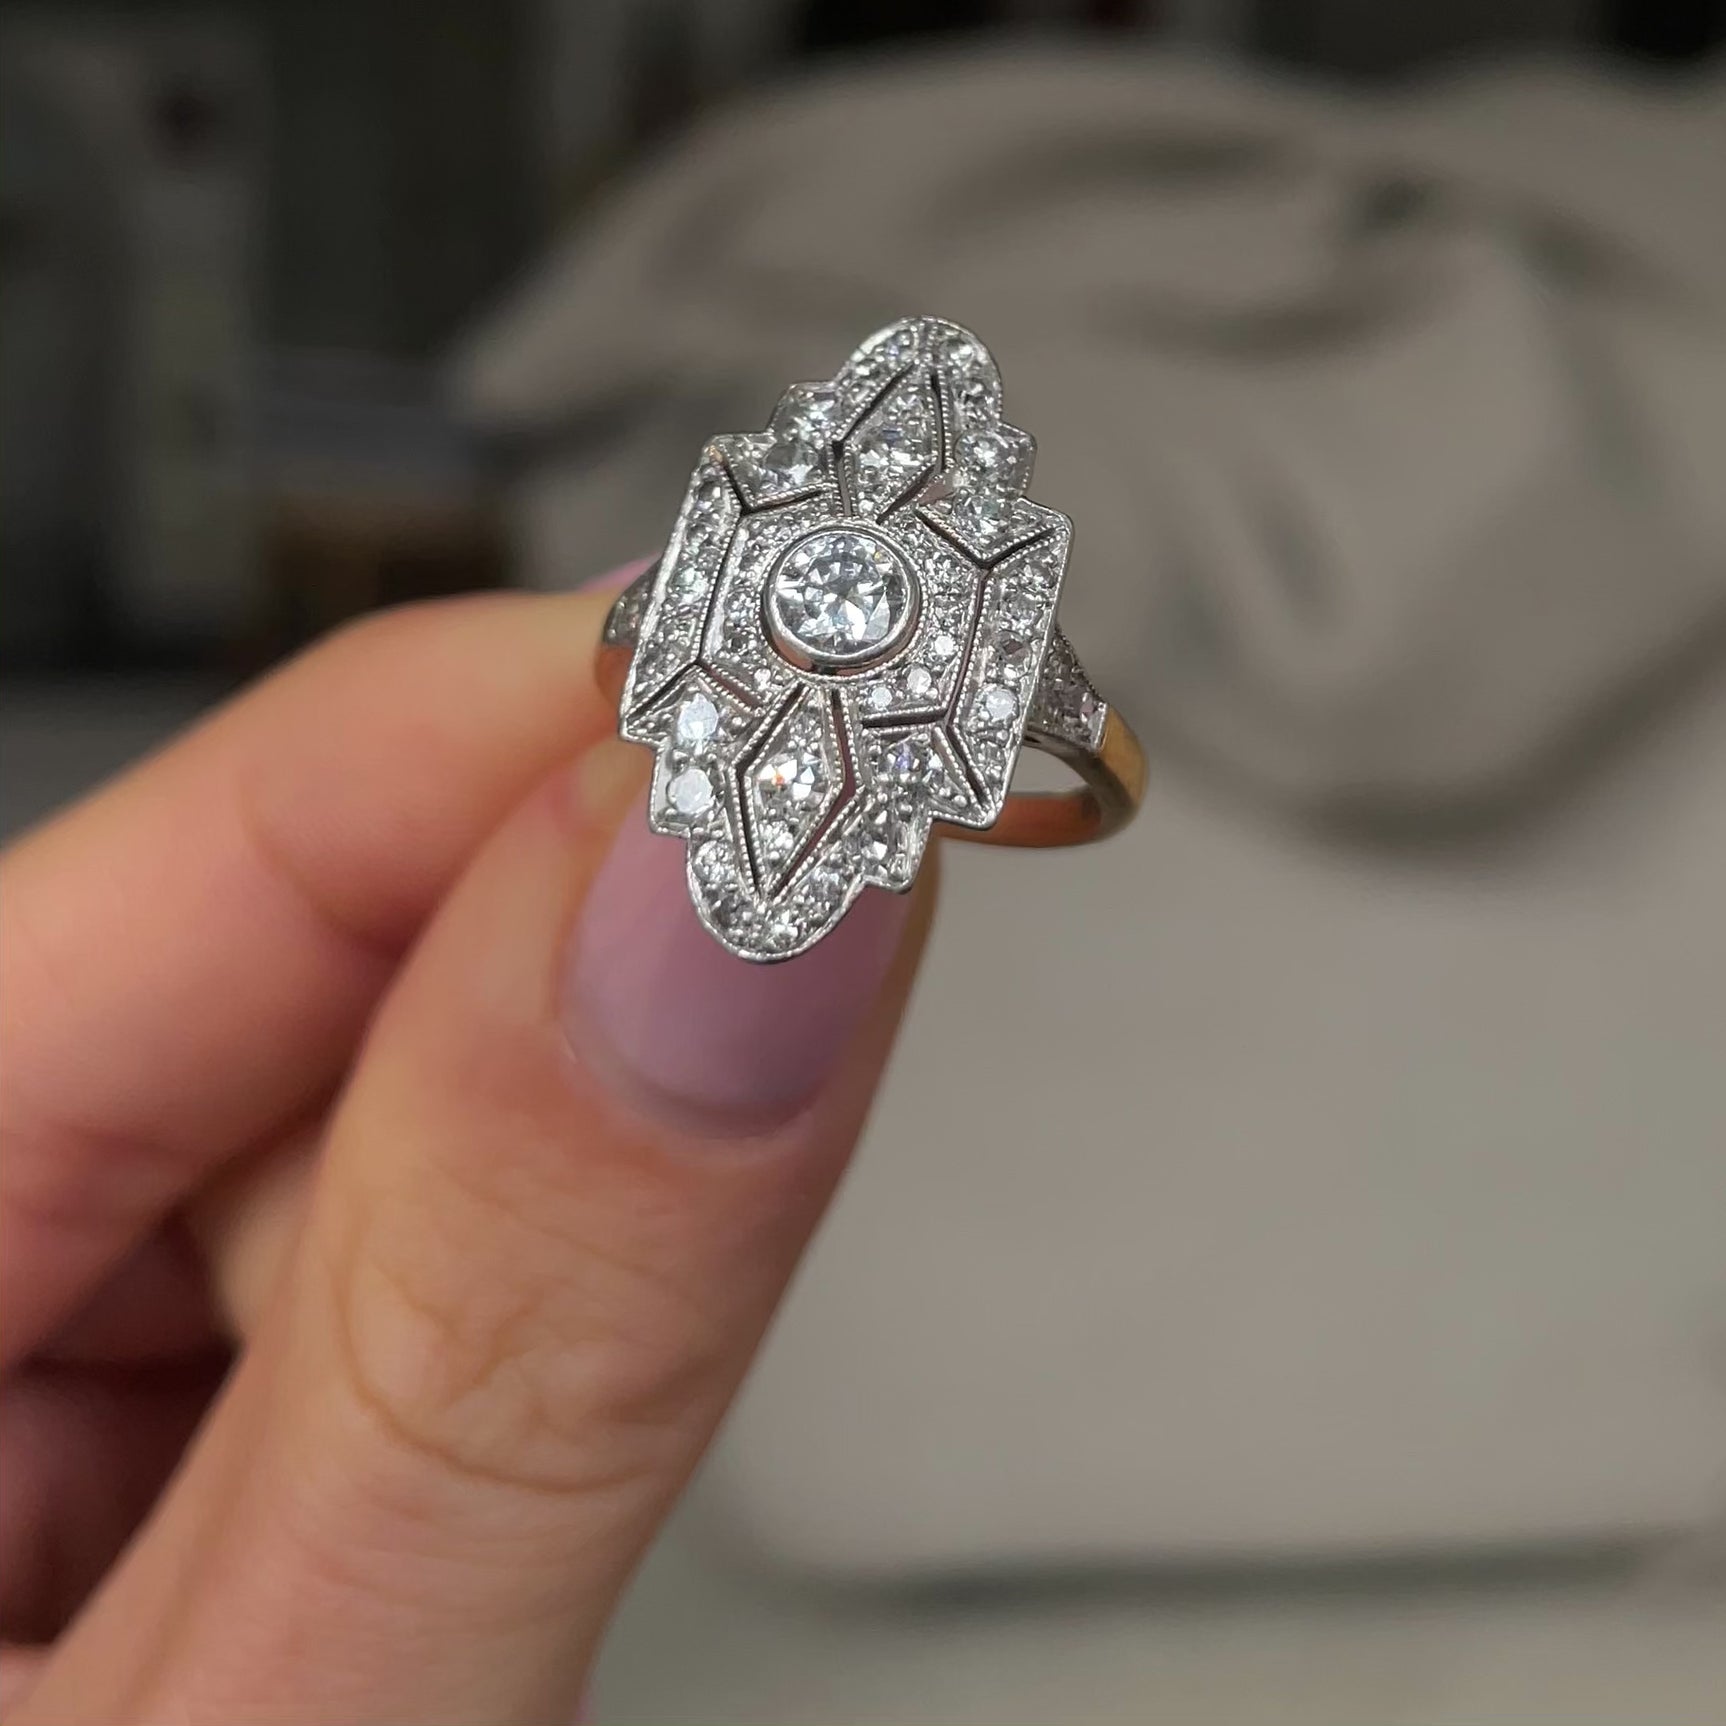 Art Deco diamond navette engagement ring, held in fingers and rotated to give perspective.